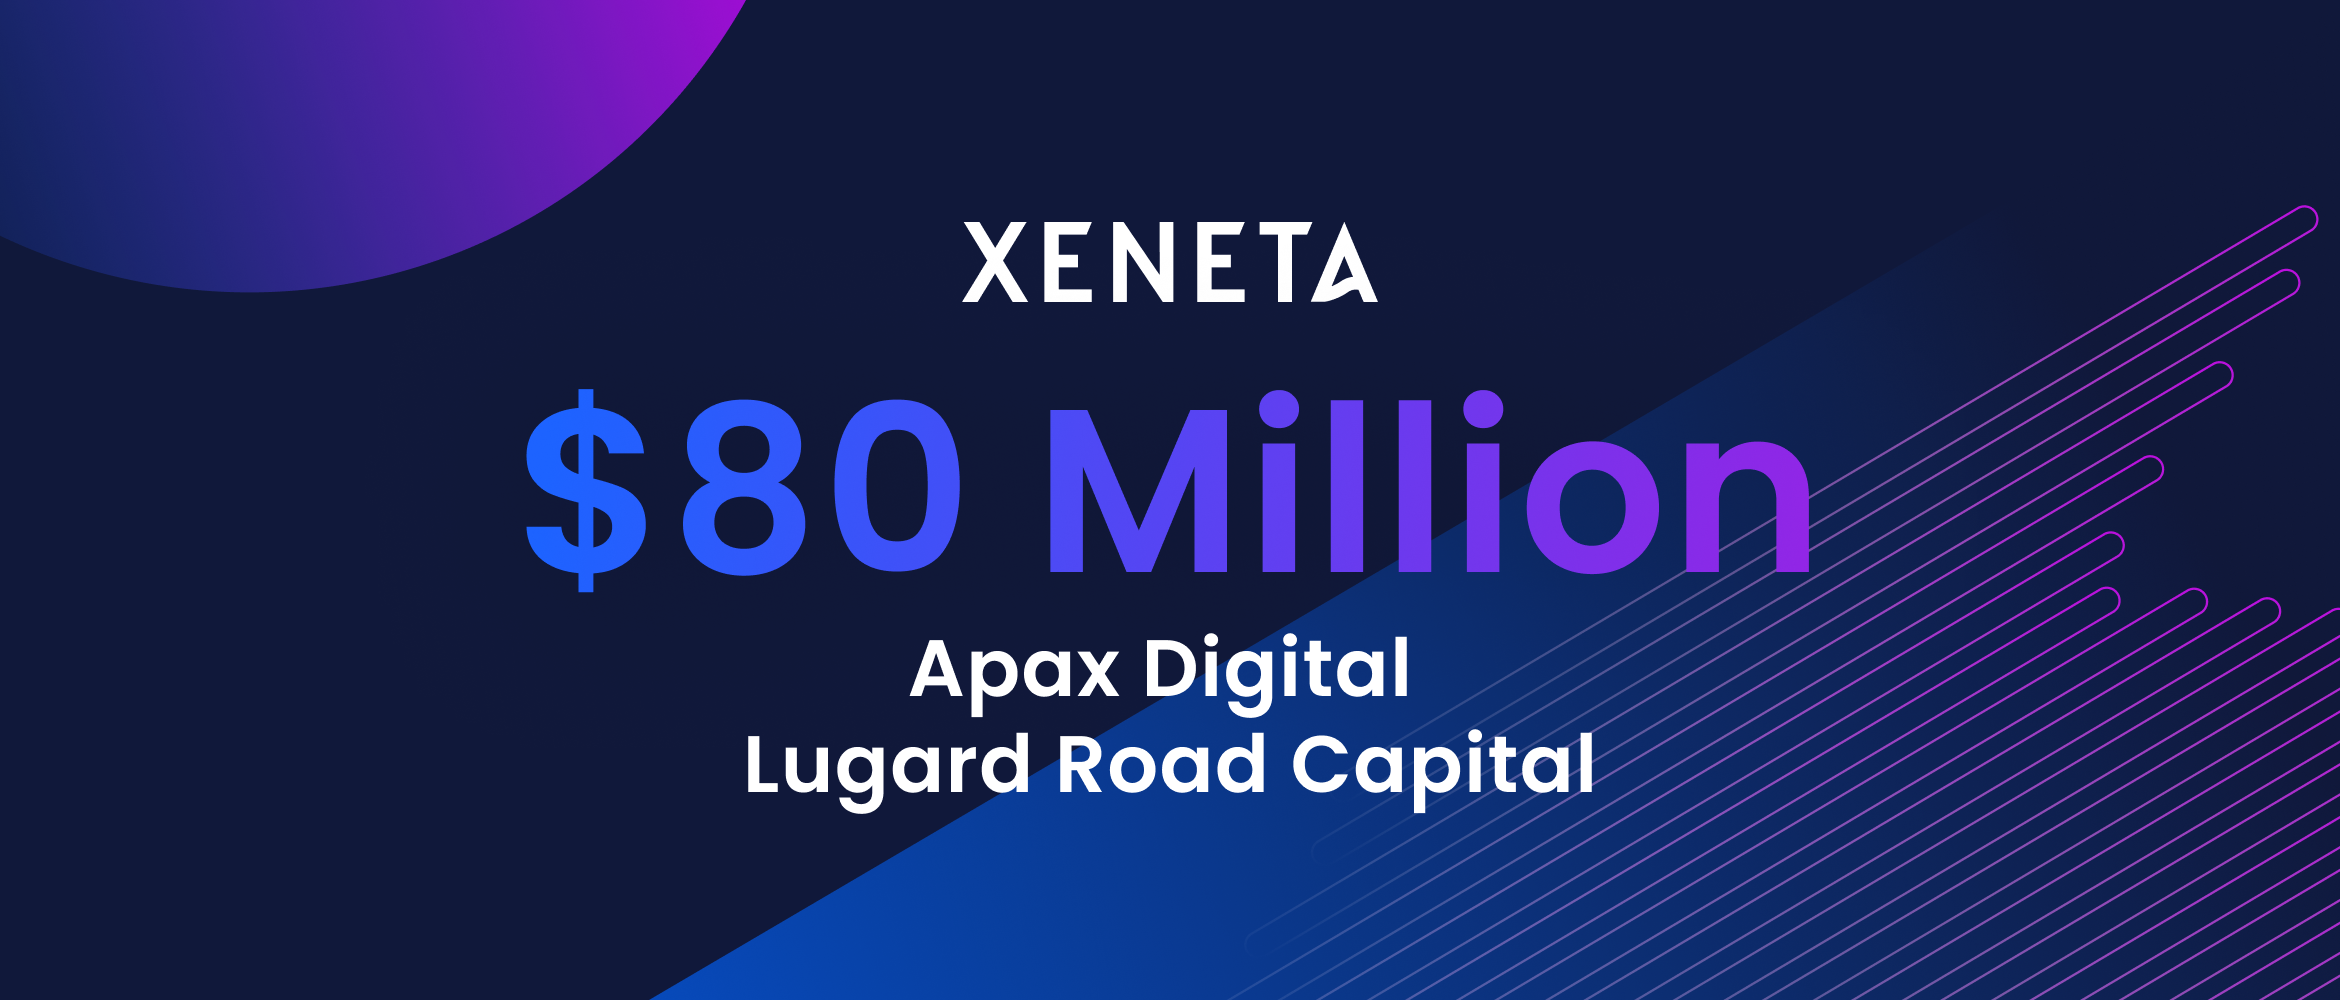 Xeneta’s Next Era of Growth: Announcing $80 Million in Additional Funding